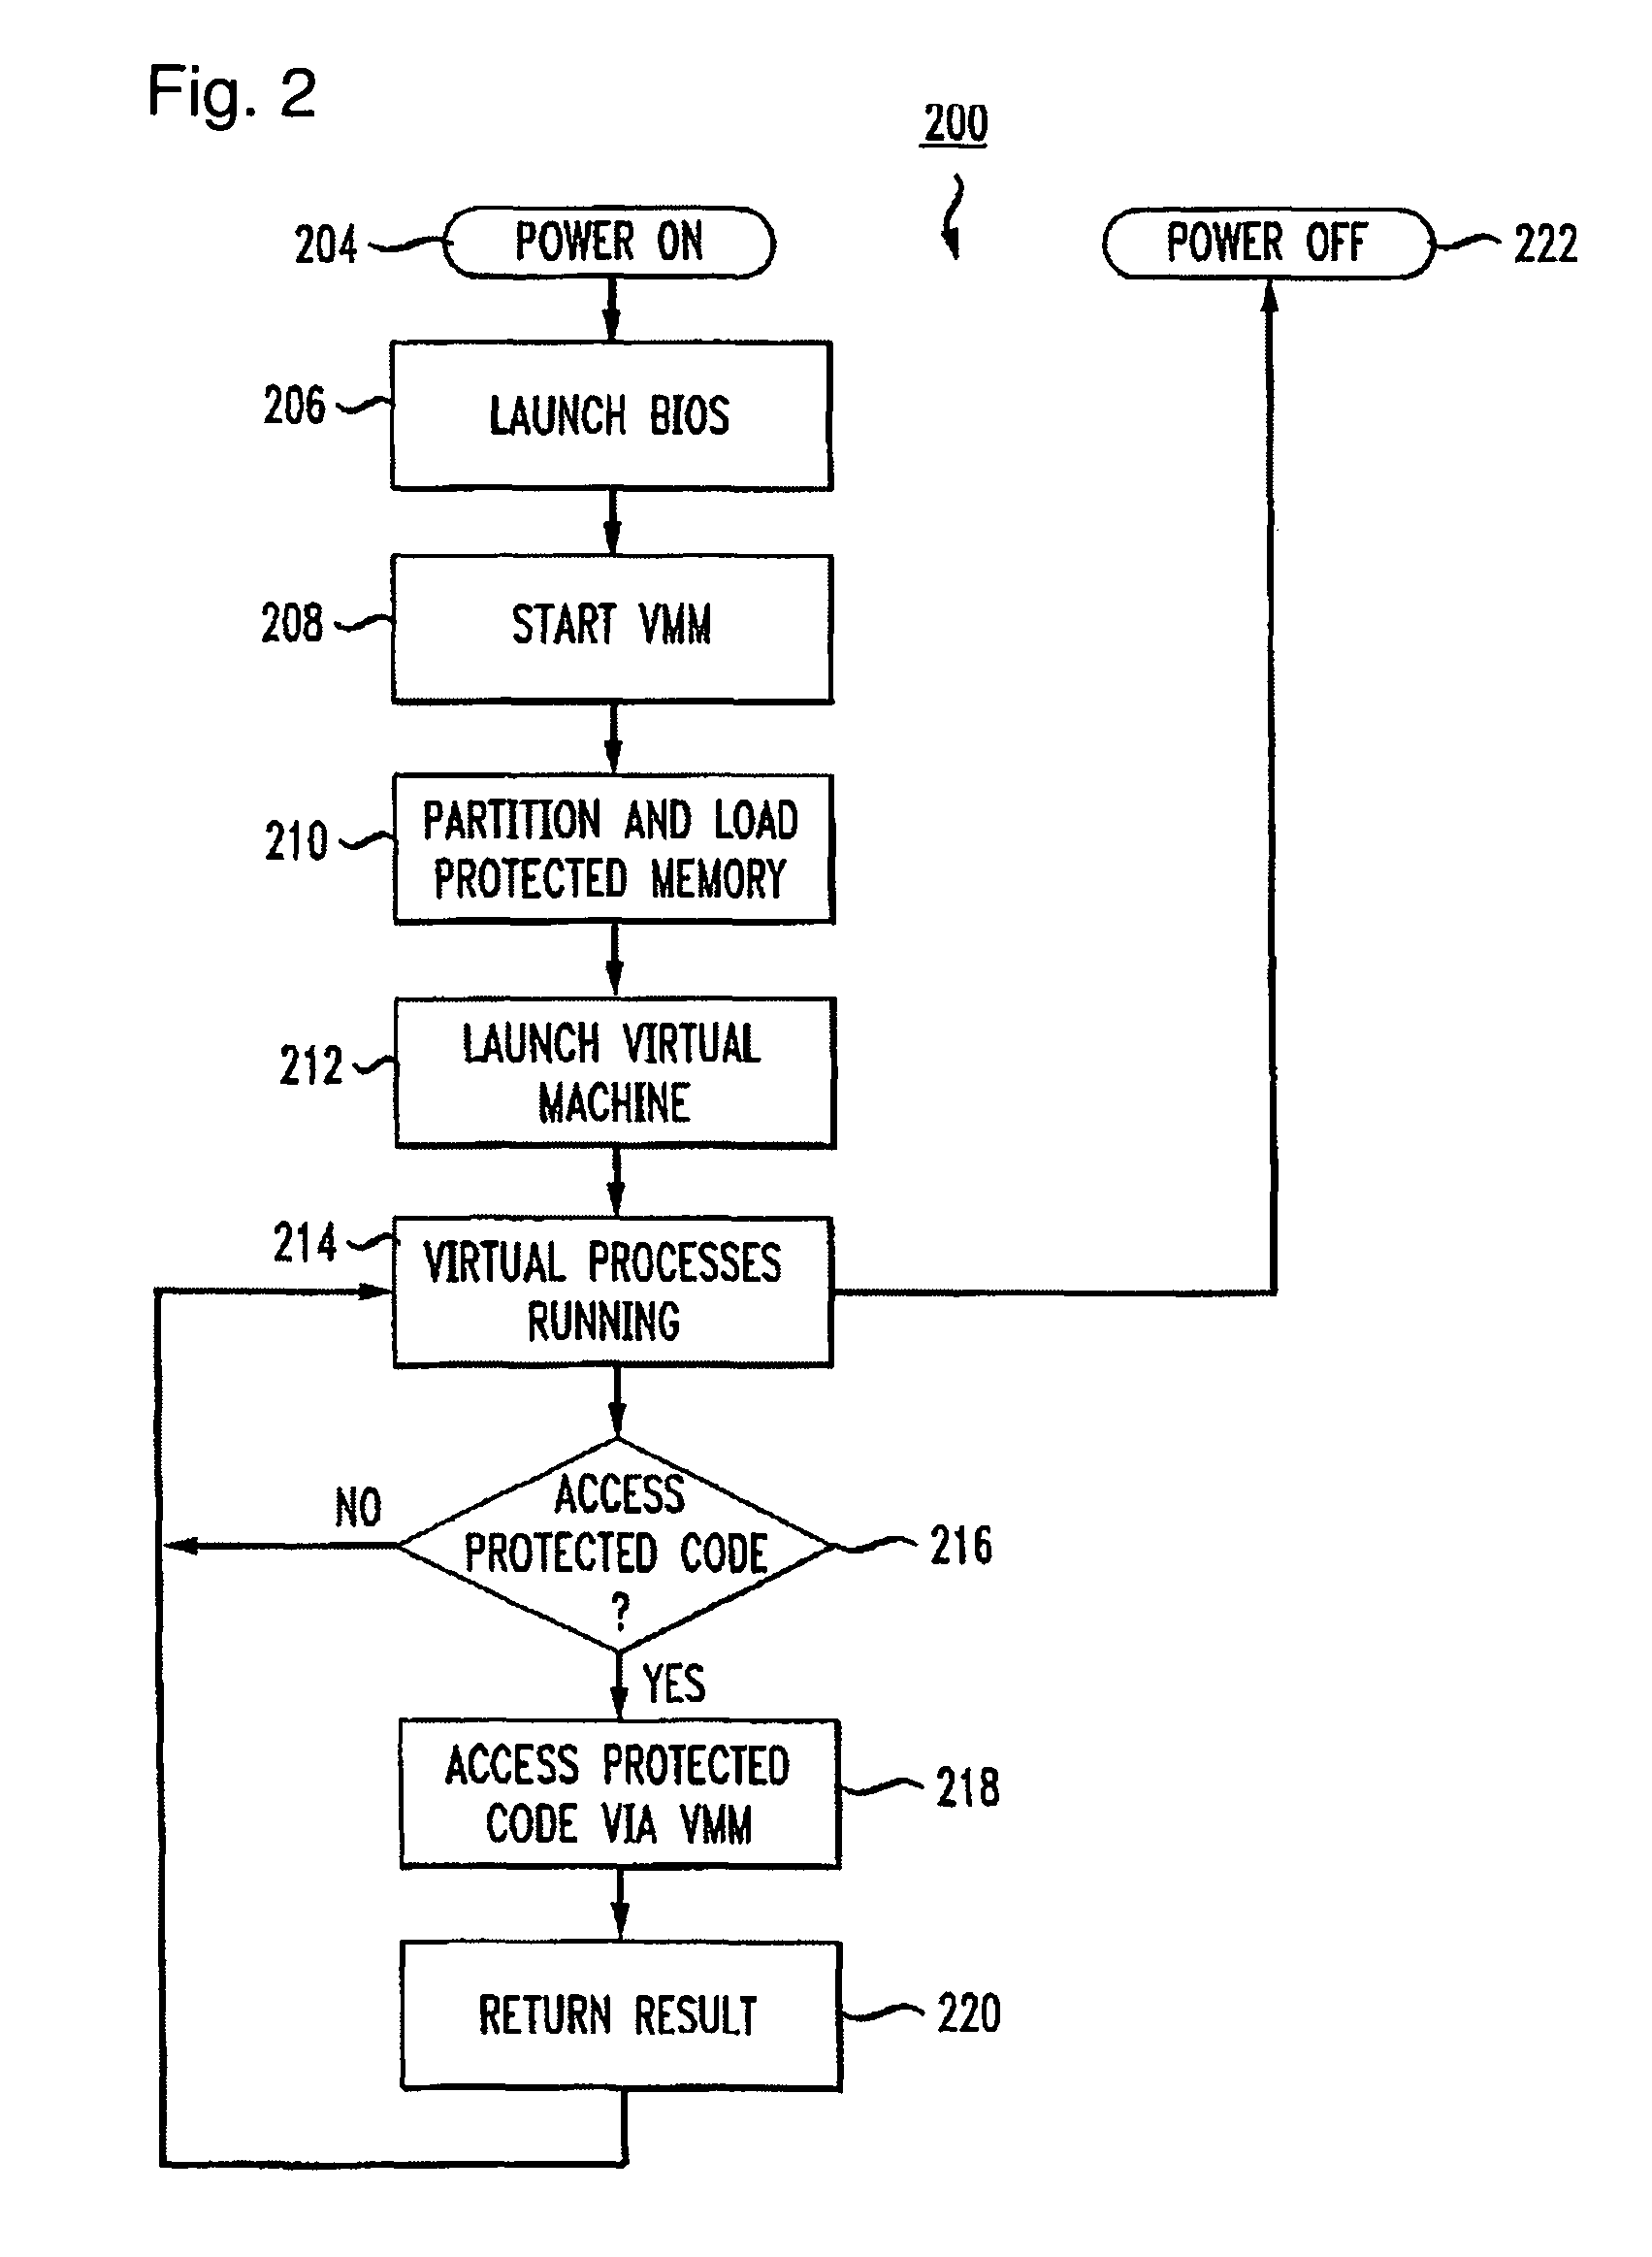 Virtualization-based security apparatuses, methods, and systems